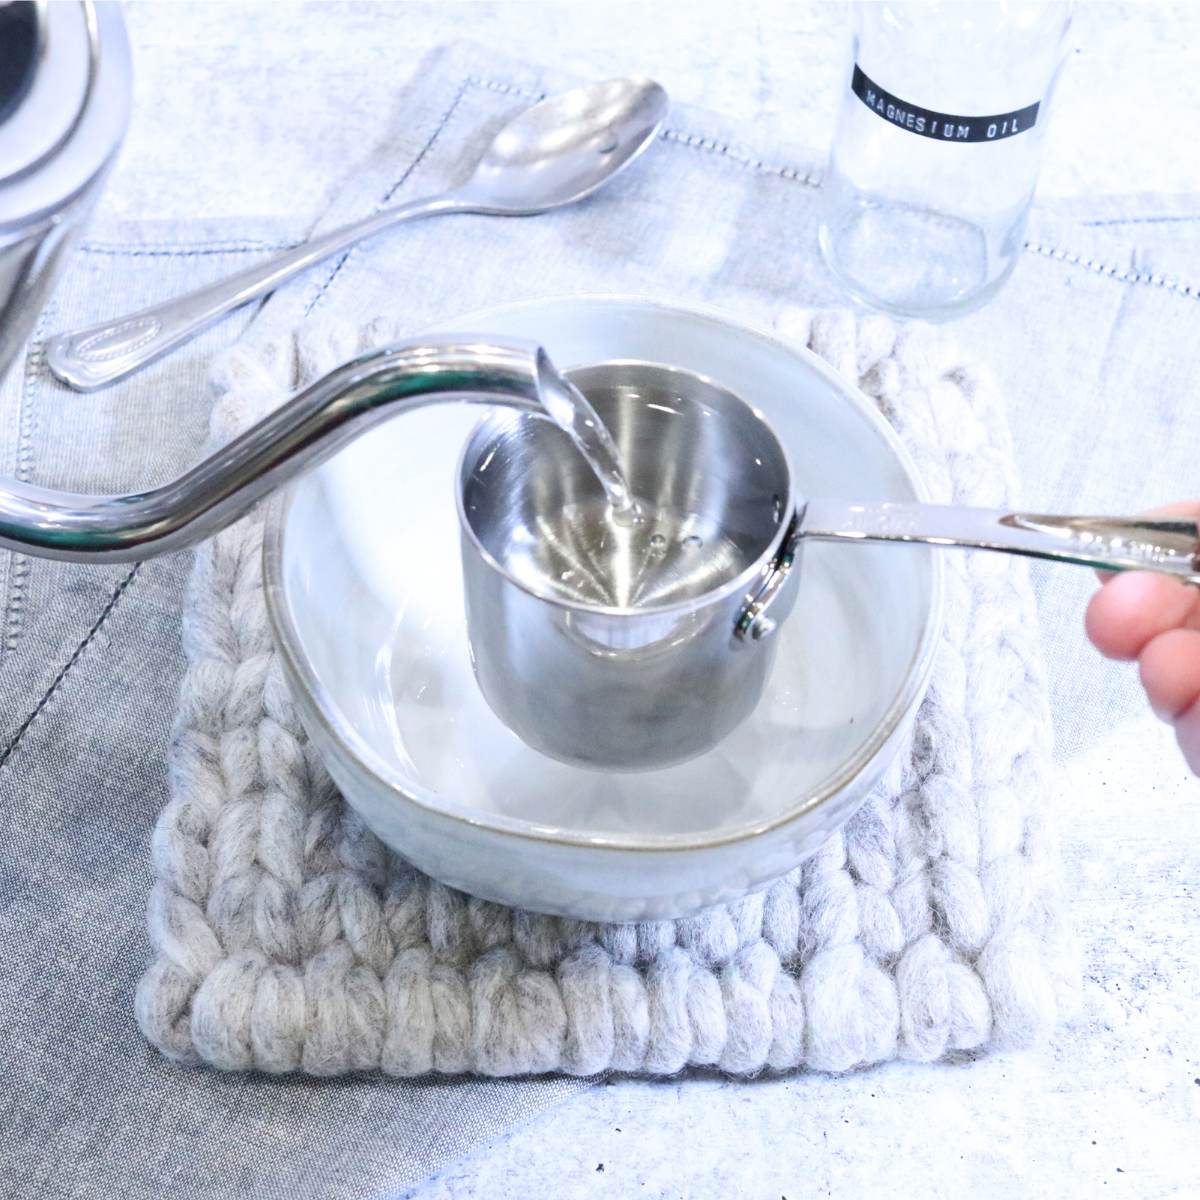 A small silver tea kettle spout pouring water into a silver measuring cup for the DIY magnesium oil recipe. A silver spoon and empty glass storage jar are in the background of the photograph.